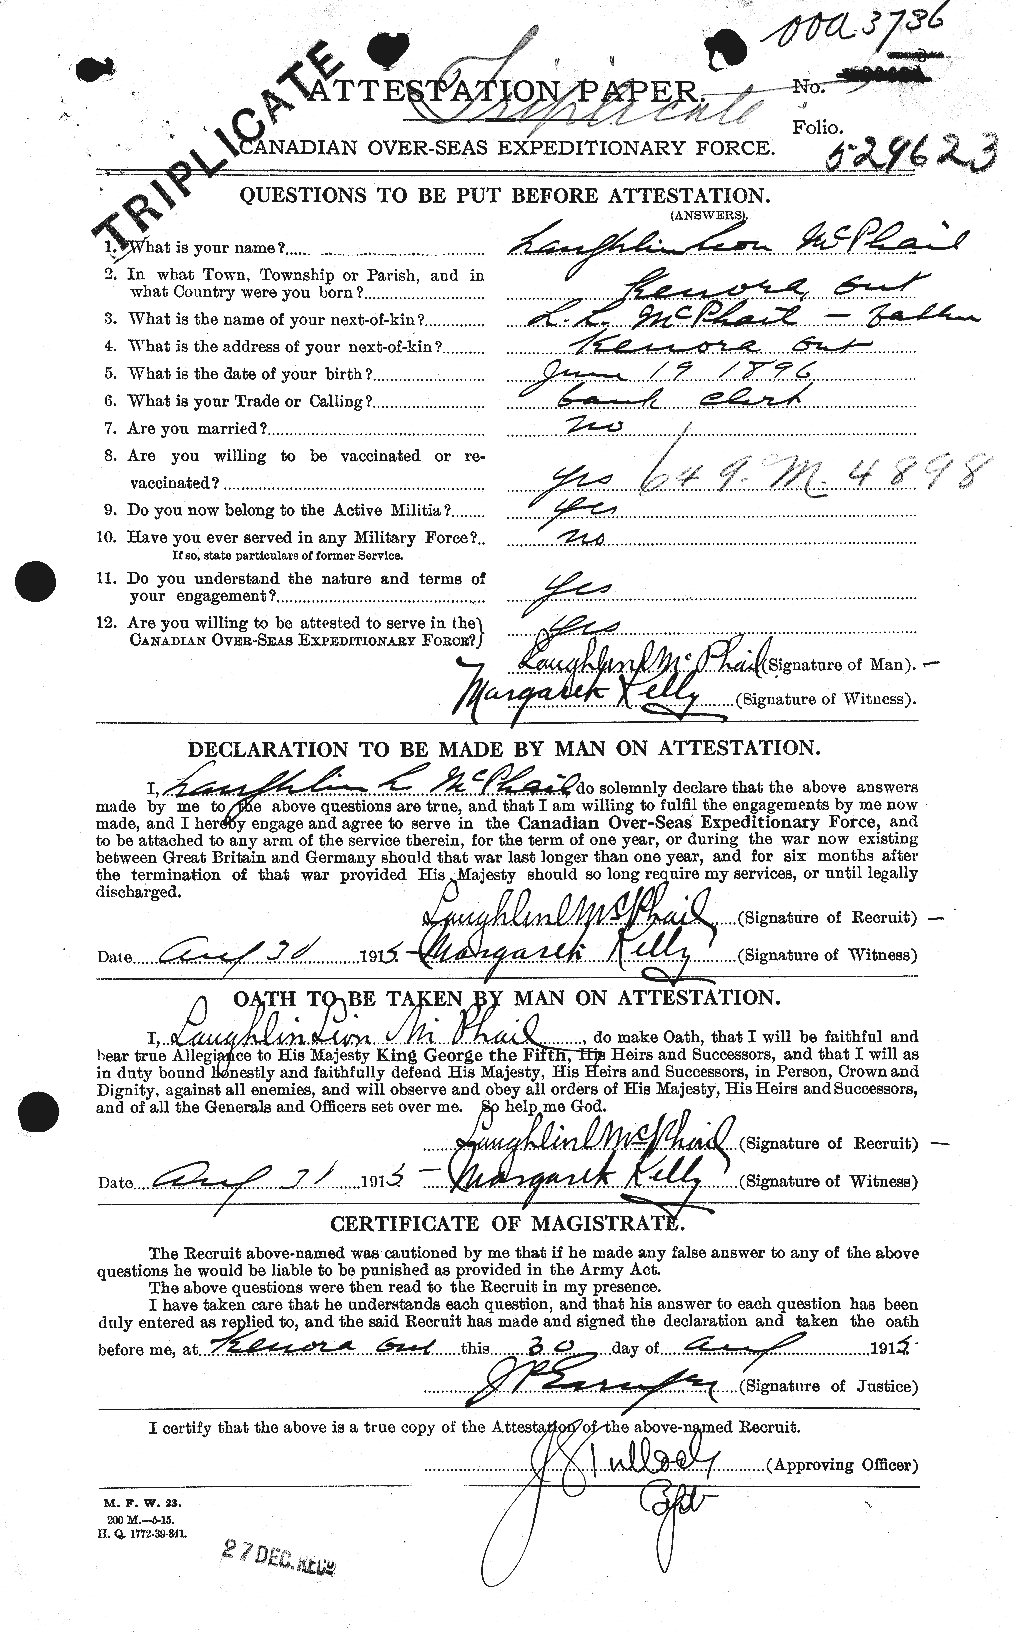 Personnel Records of the First World War - CEF 540885a